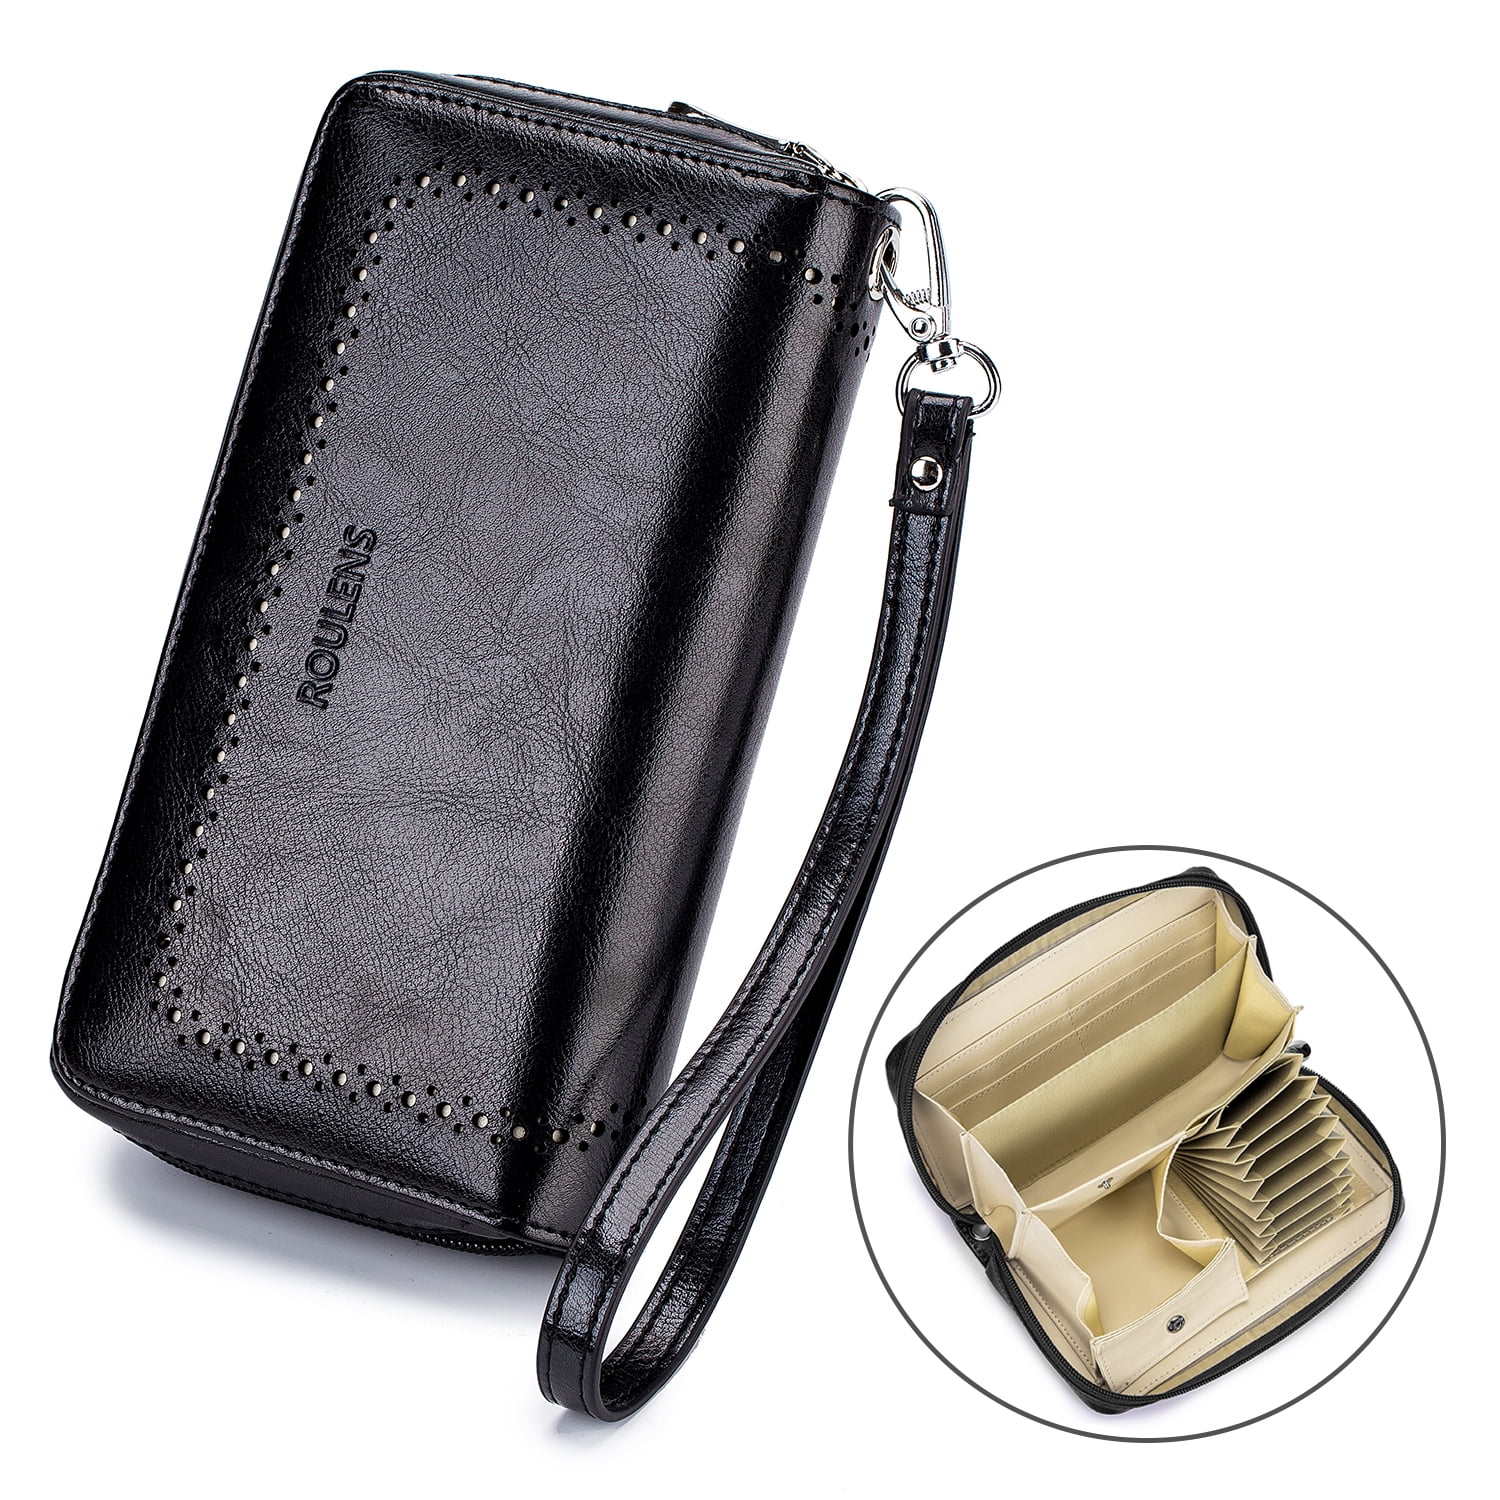 Roulens Ladies Purse PU Leather Wallet for Women with RFID Leaf Pendant Zipper Coin Long Purse with Multiple Card Slots and Card Holders Phone Pocket 